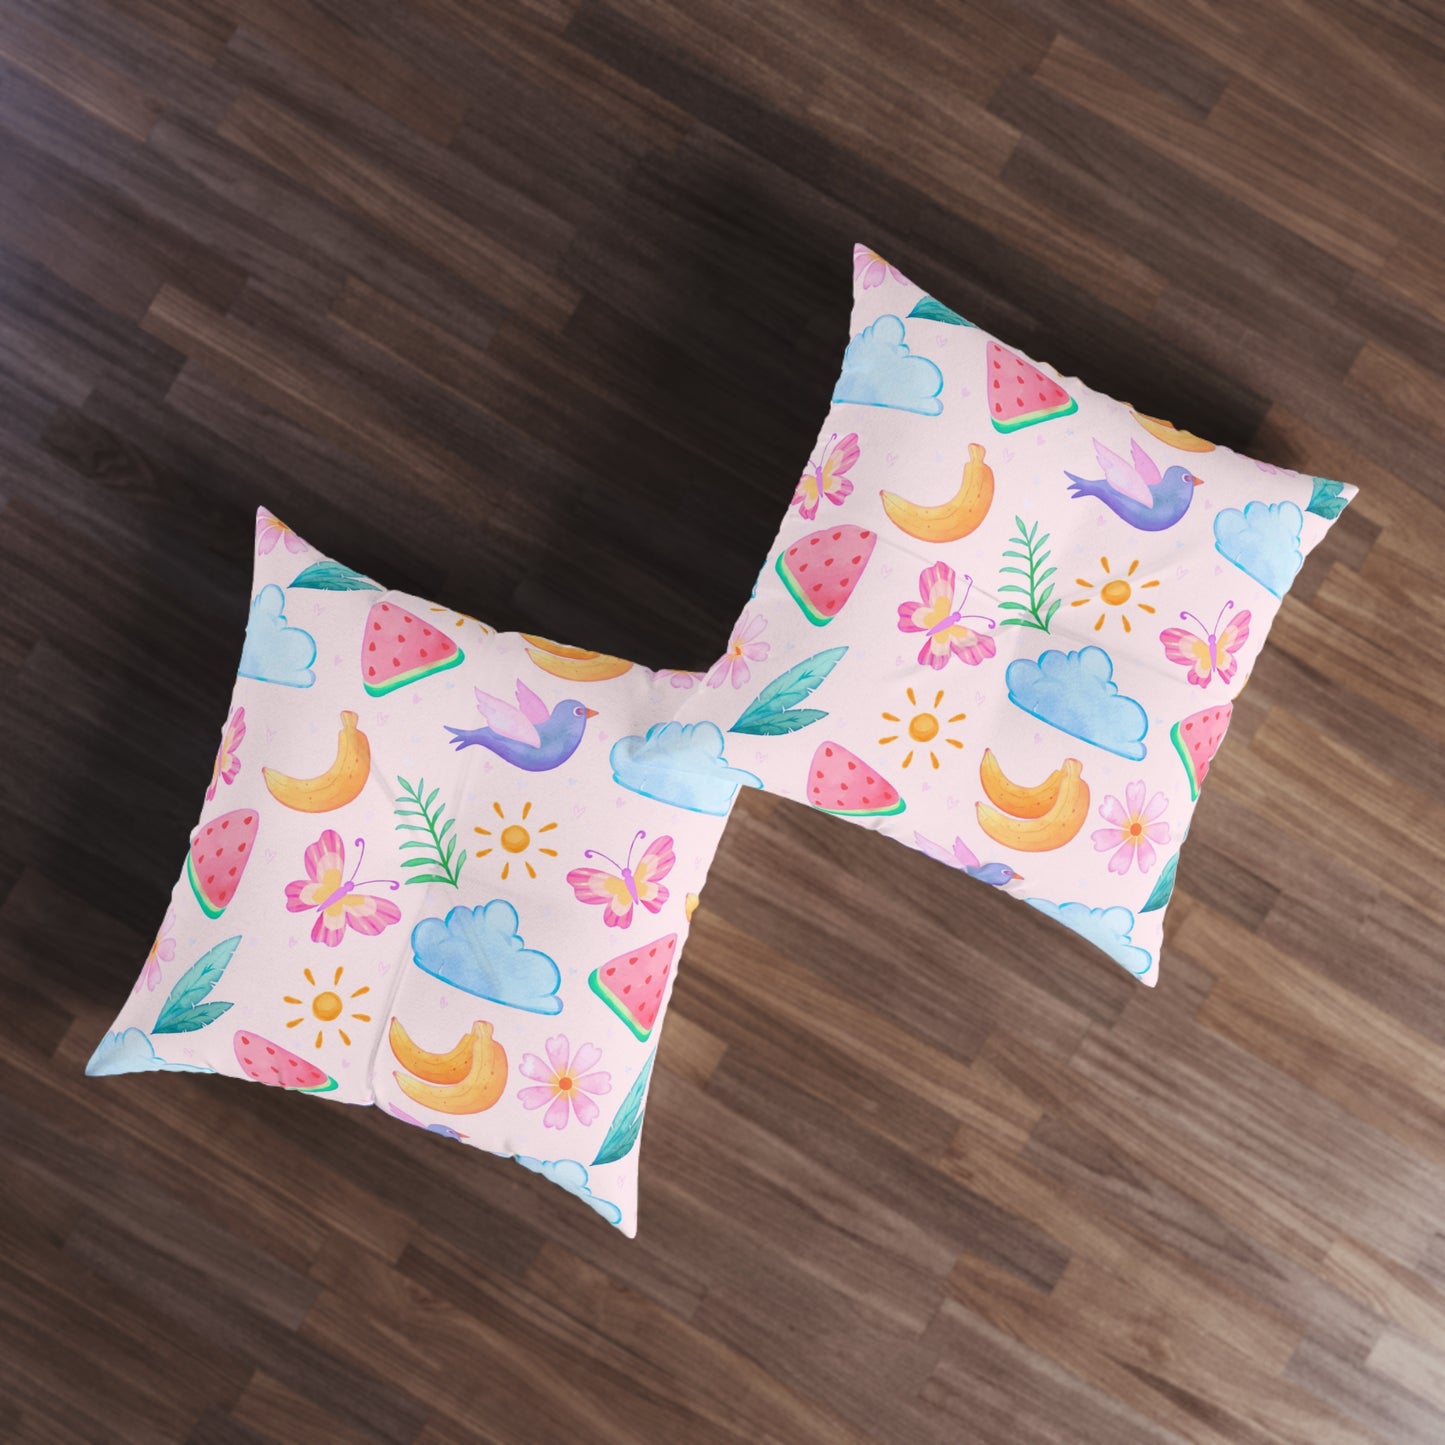 Niccie Vibrant Square Cushion: Colorful Pattern Floor Pillow